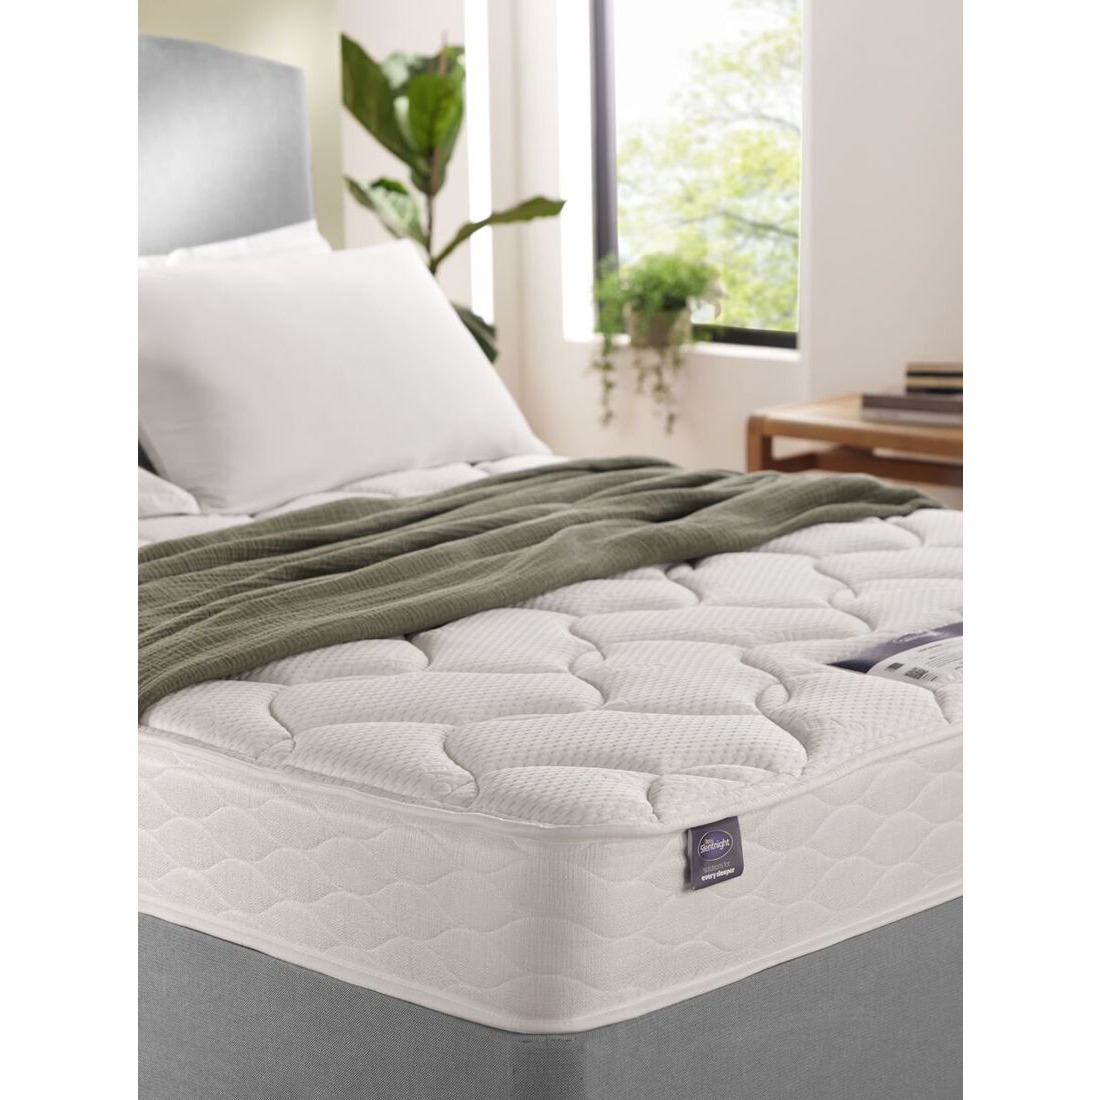 Silentnight Recover Open Coil Mattress, Firm Tension, King Size - image 1